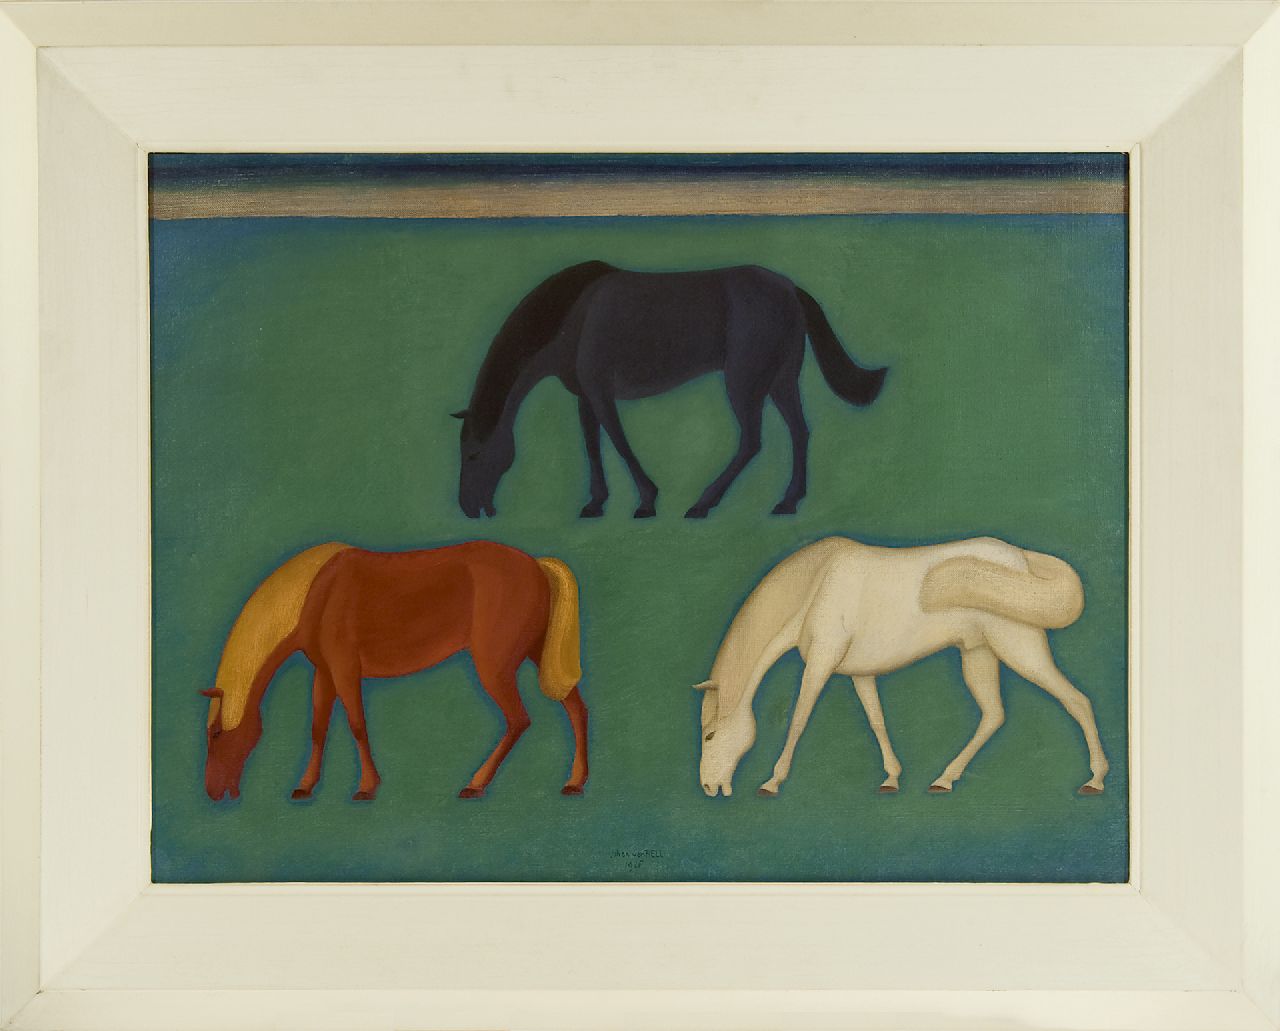 Hell J.G.D. van | Johannes Gerardus Diederik 'Johan' van Hell | Paintings offered for sale | Three grazing horses, oil on canvas 60.5 x 80.5 cm, signed l.c. and dated 1926